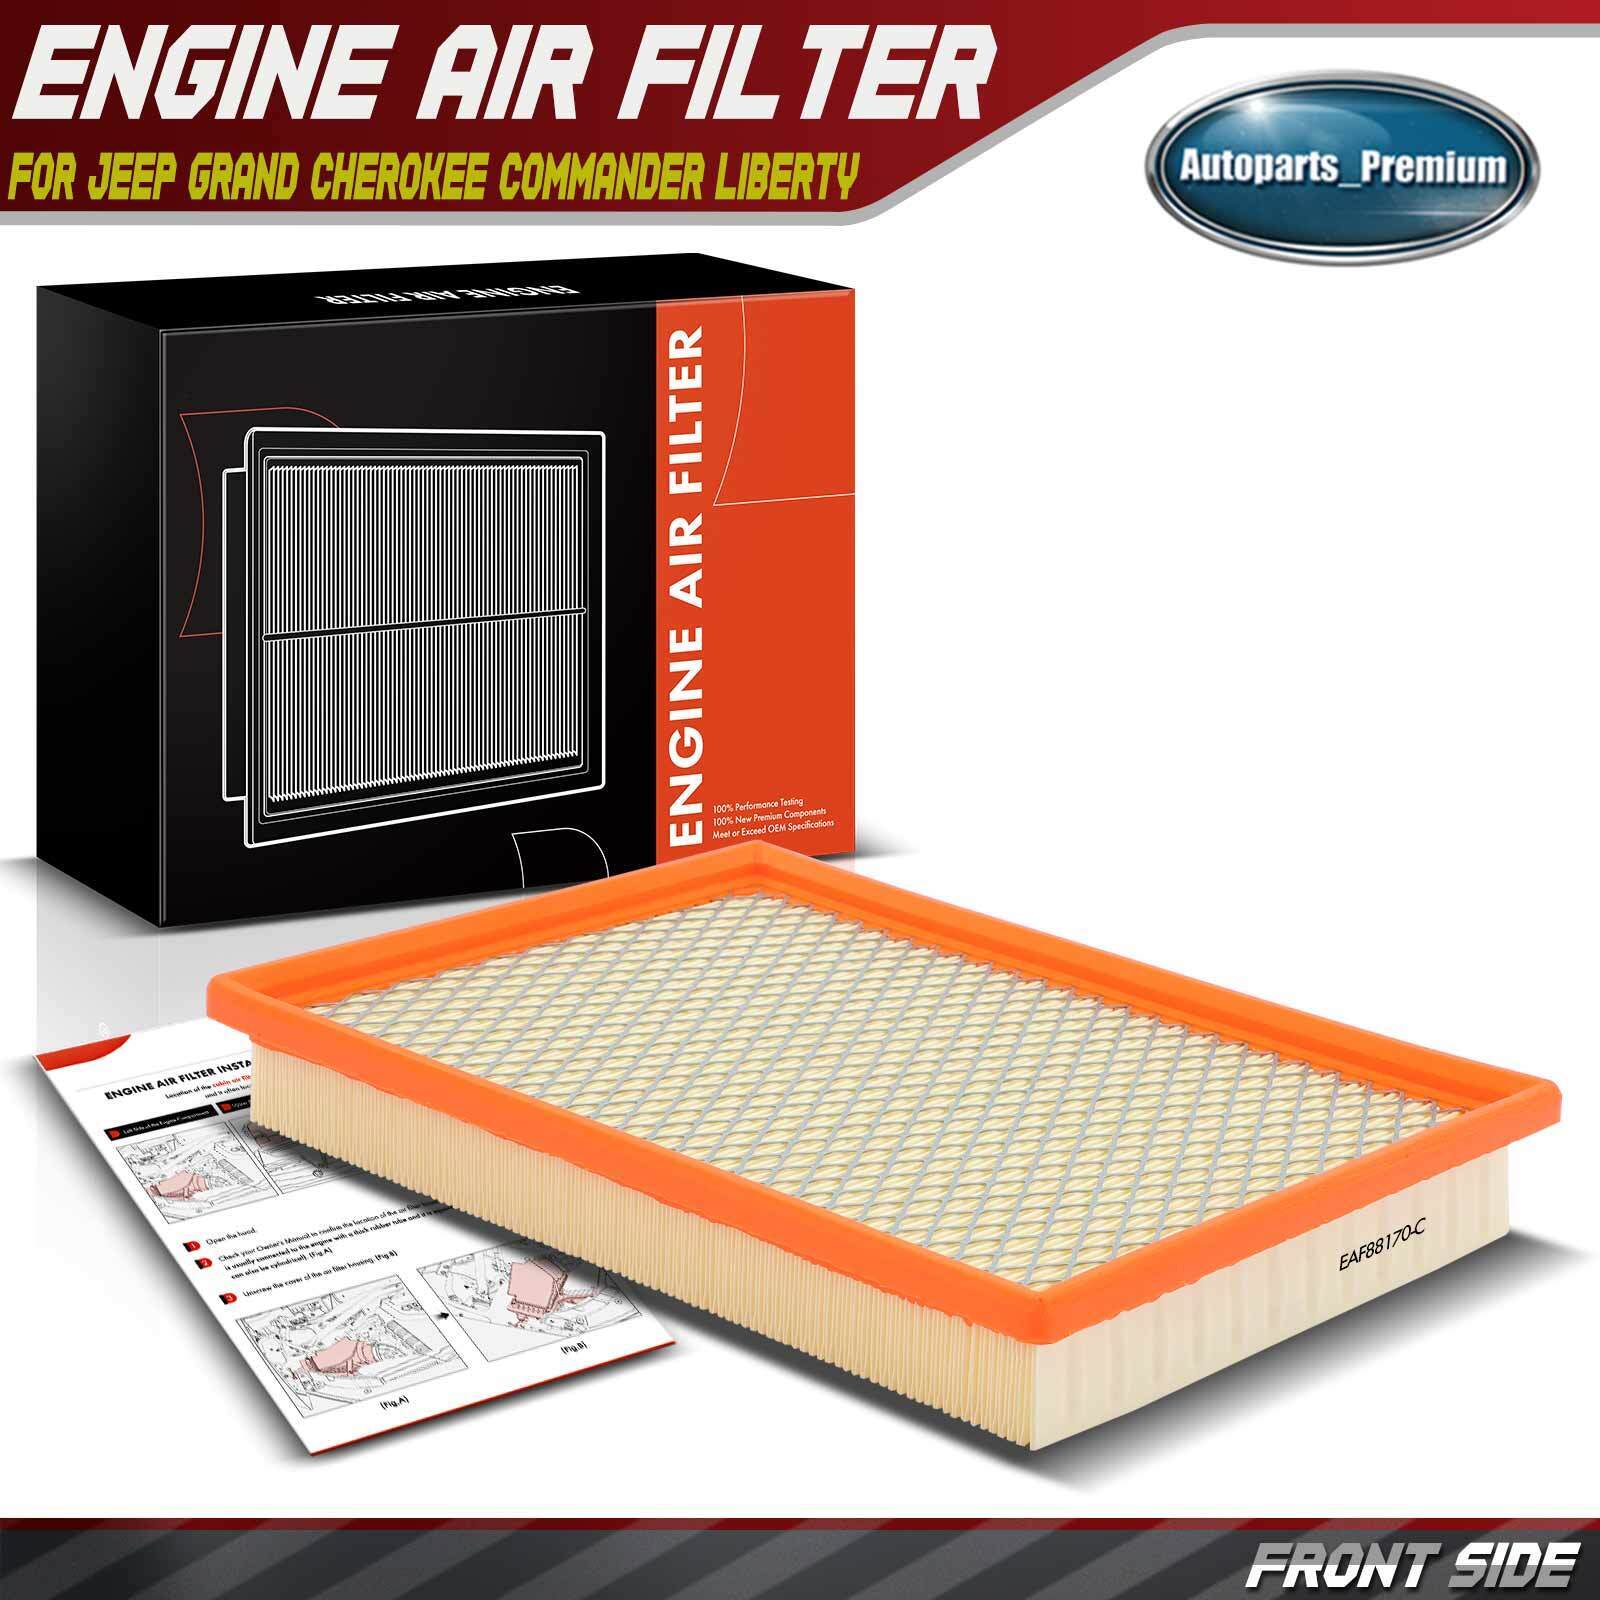 Engine Air Filter with Flexible Panel for Jeep Grand Cherokee Commander Liberty